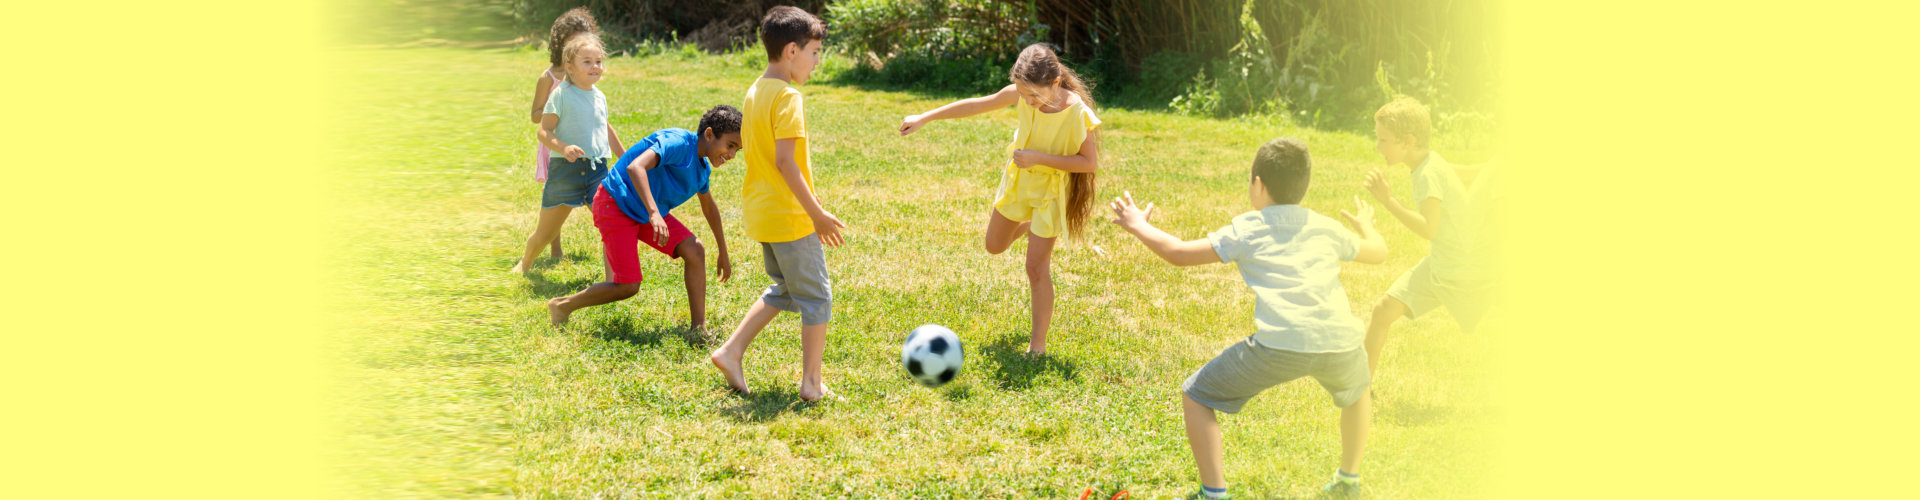 a group happy children playing football together